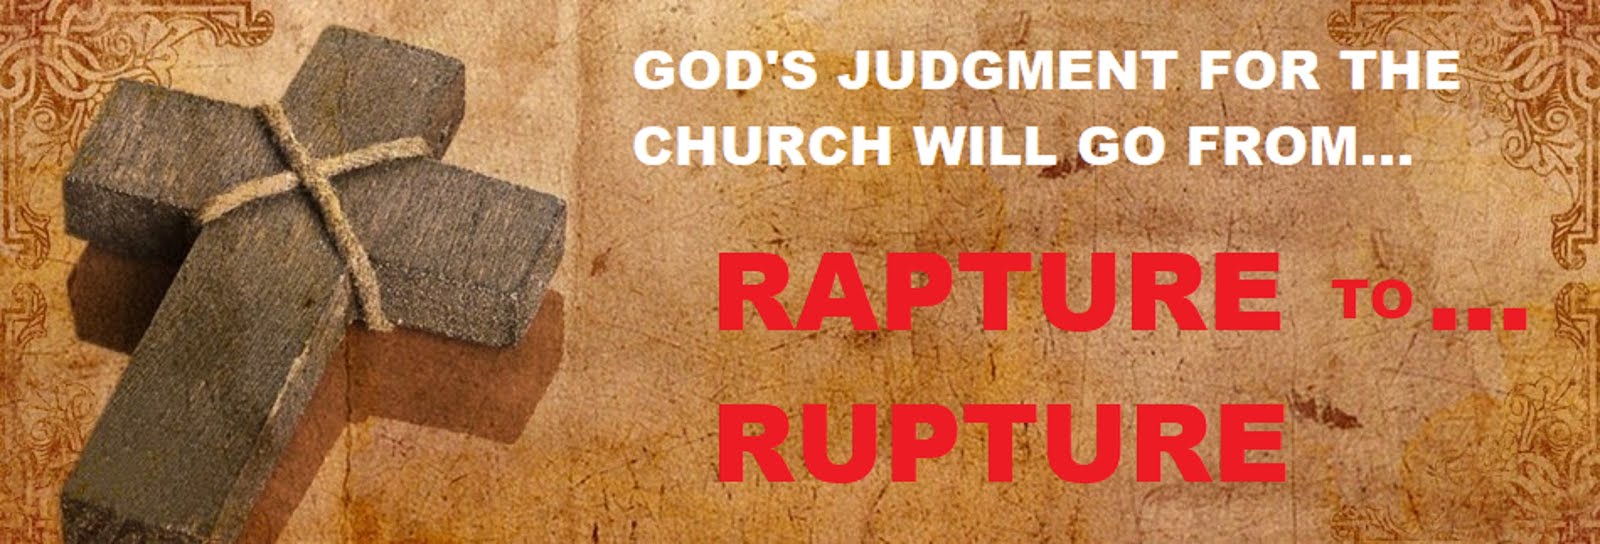 "FROM "RAPTURE TO RUPTURE"